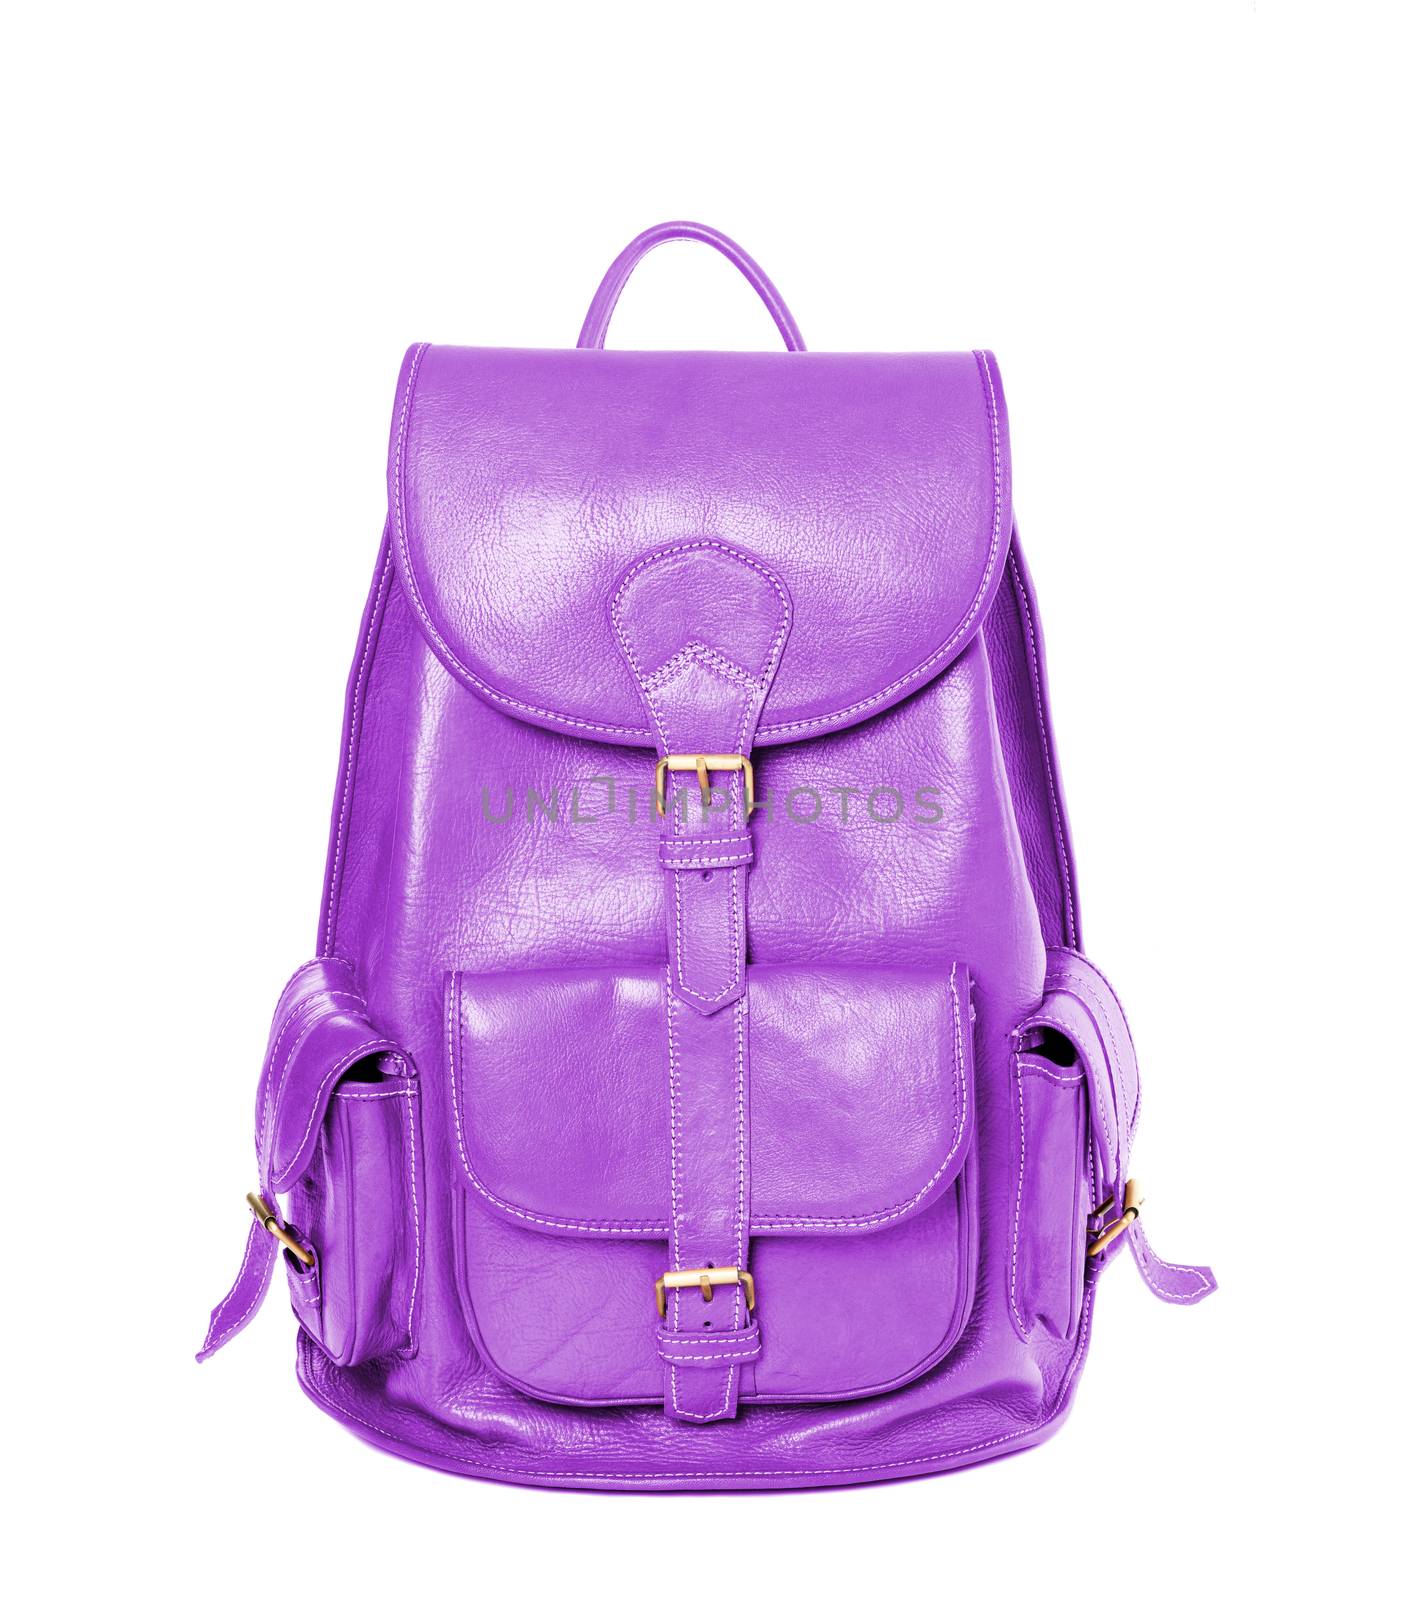 Magenta leather backpack standing isolated on white background